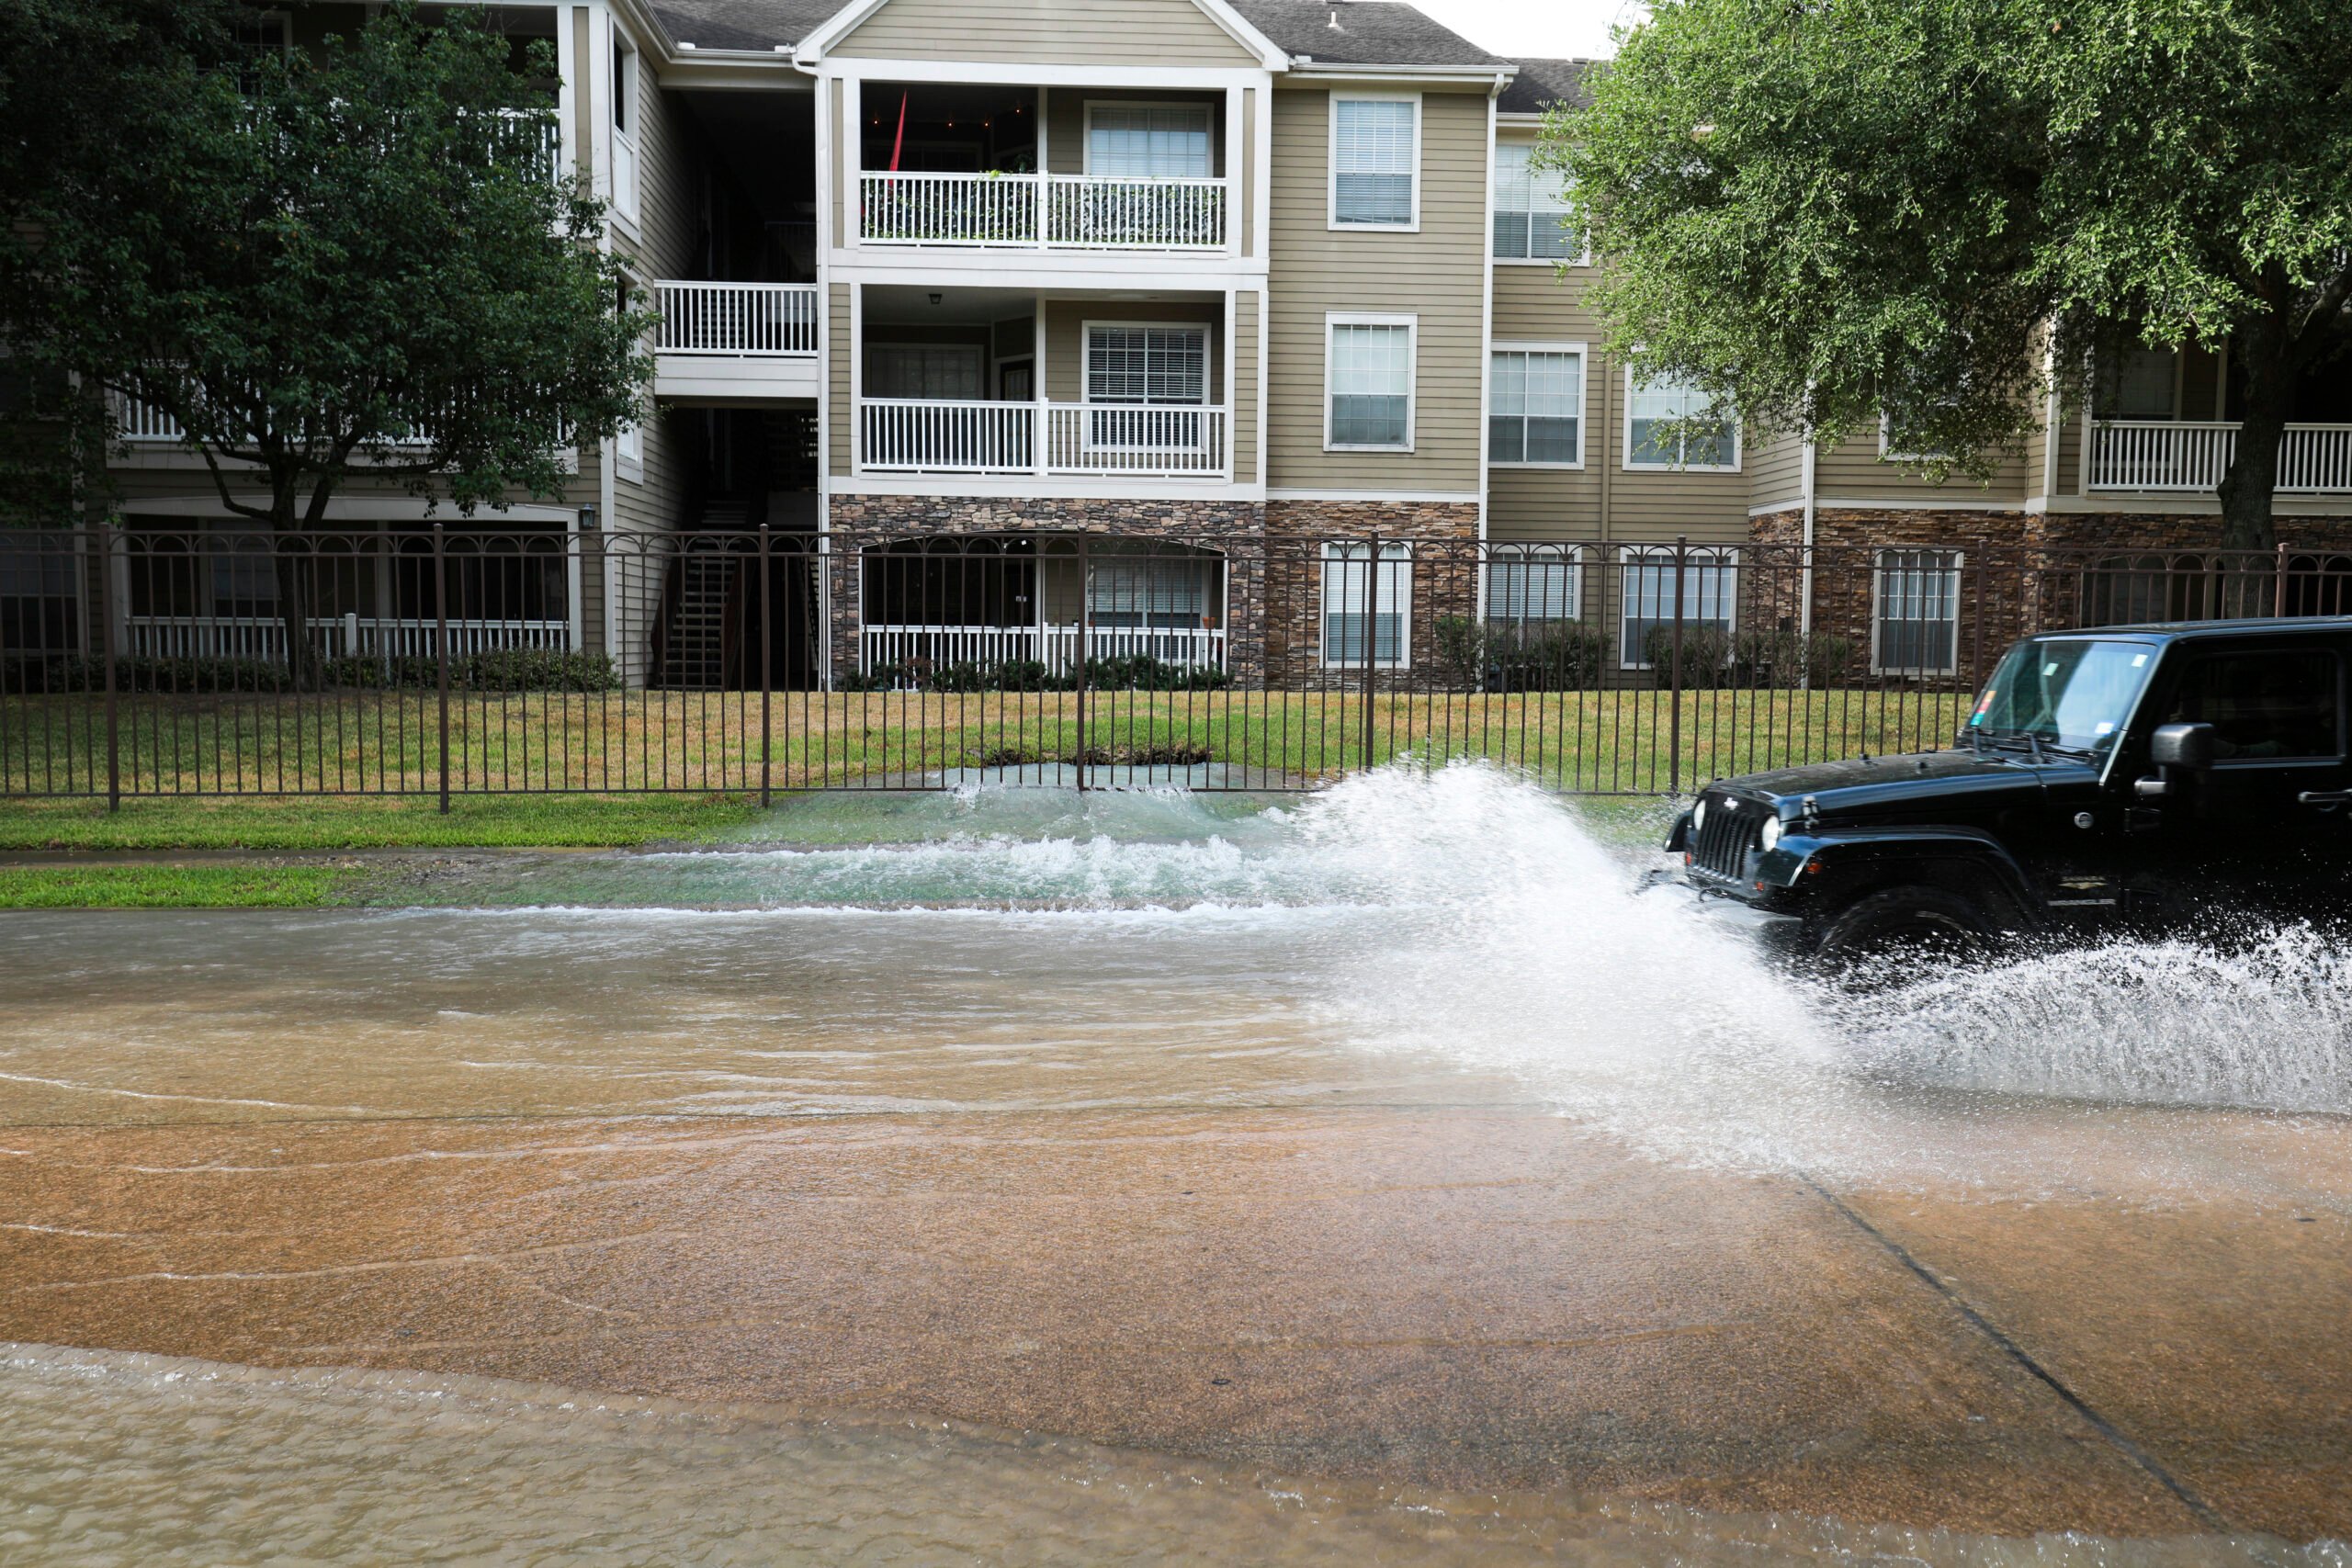 A dark-colored SUV plows into a massive puddle of water, spewing from broken pipes at the sidewalk near an urban Texas apartment building in Houston, one of many severe water leaks requiring repairs during the heatwave.